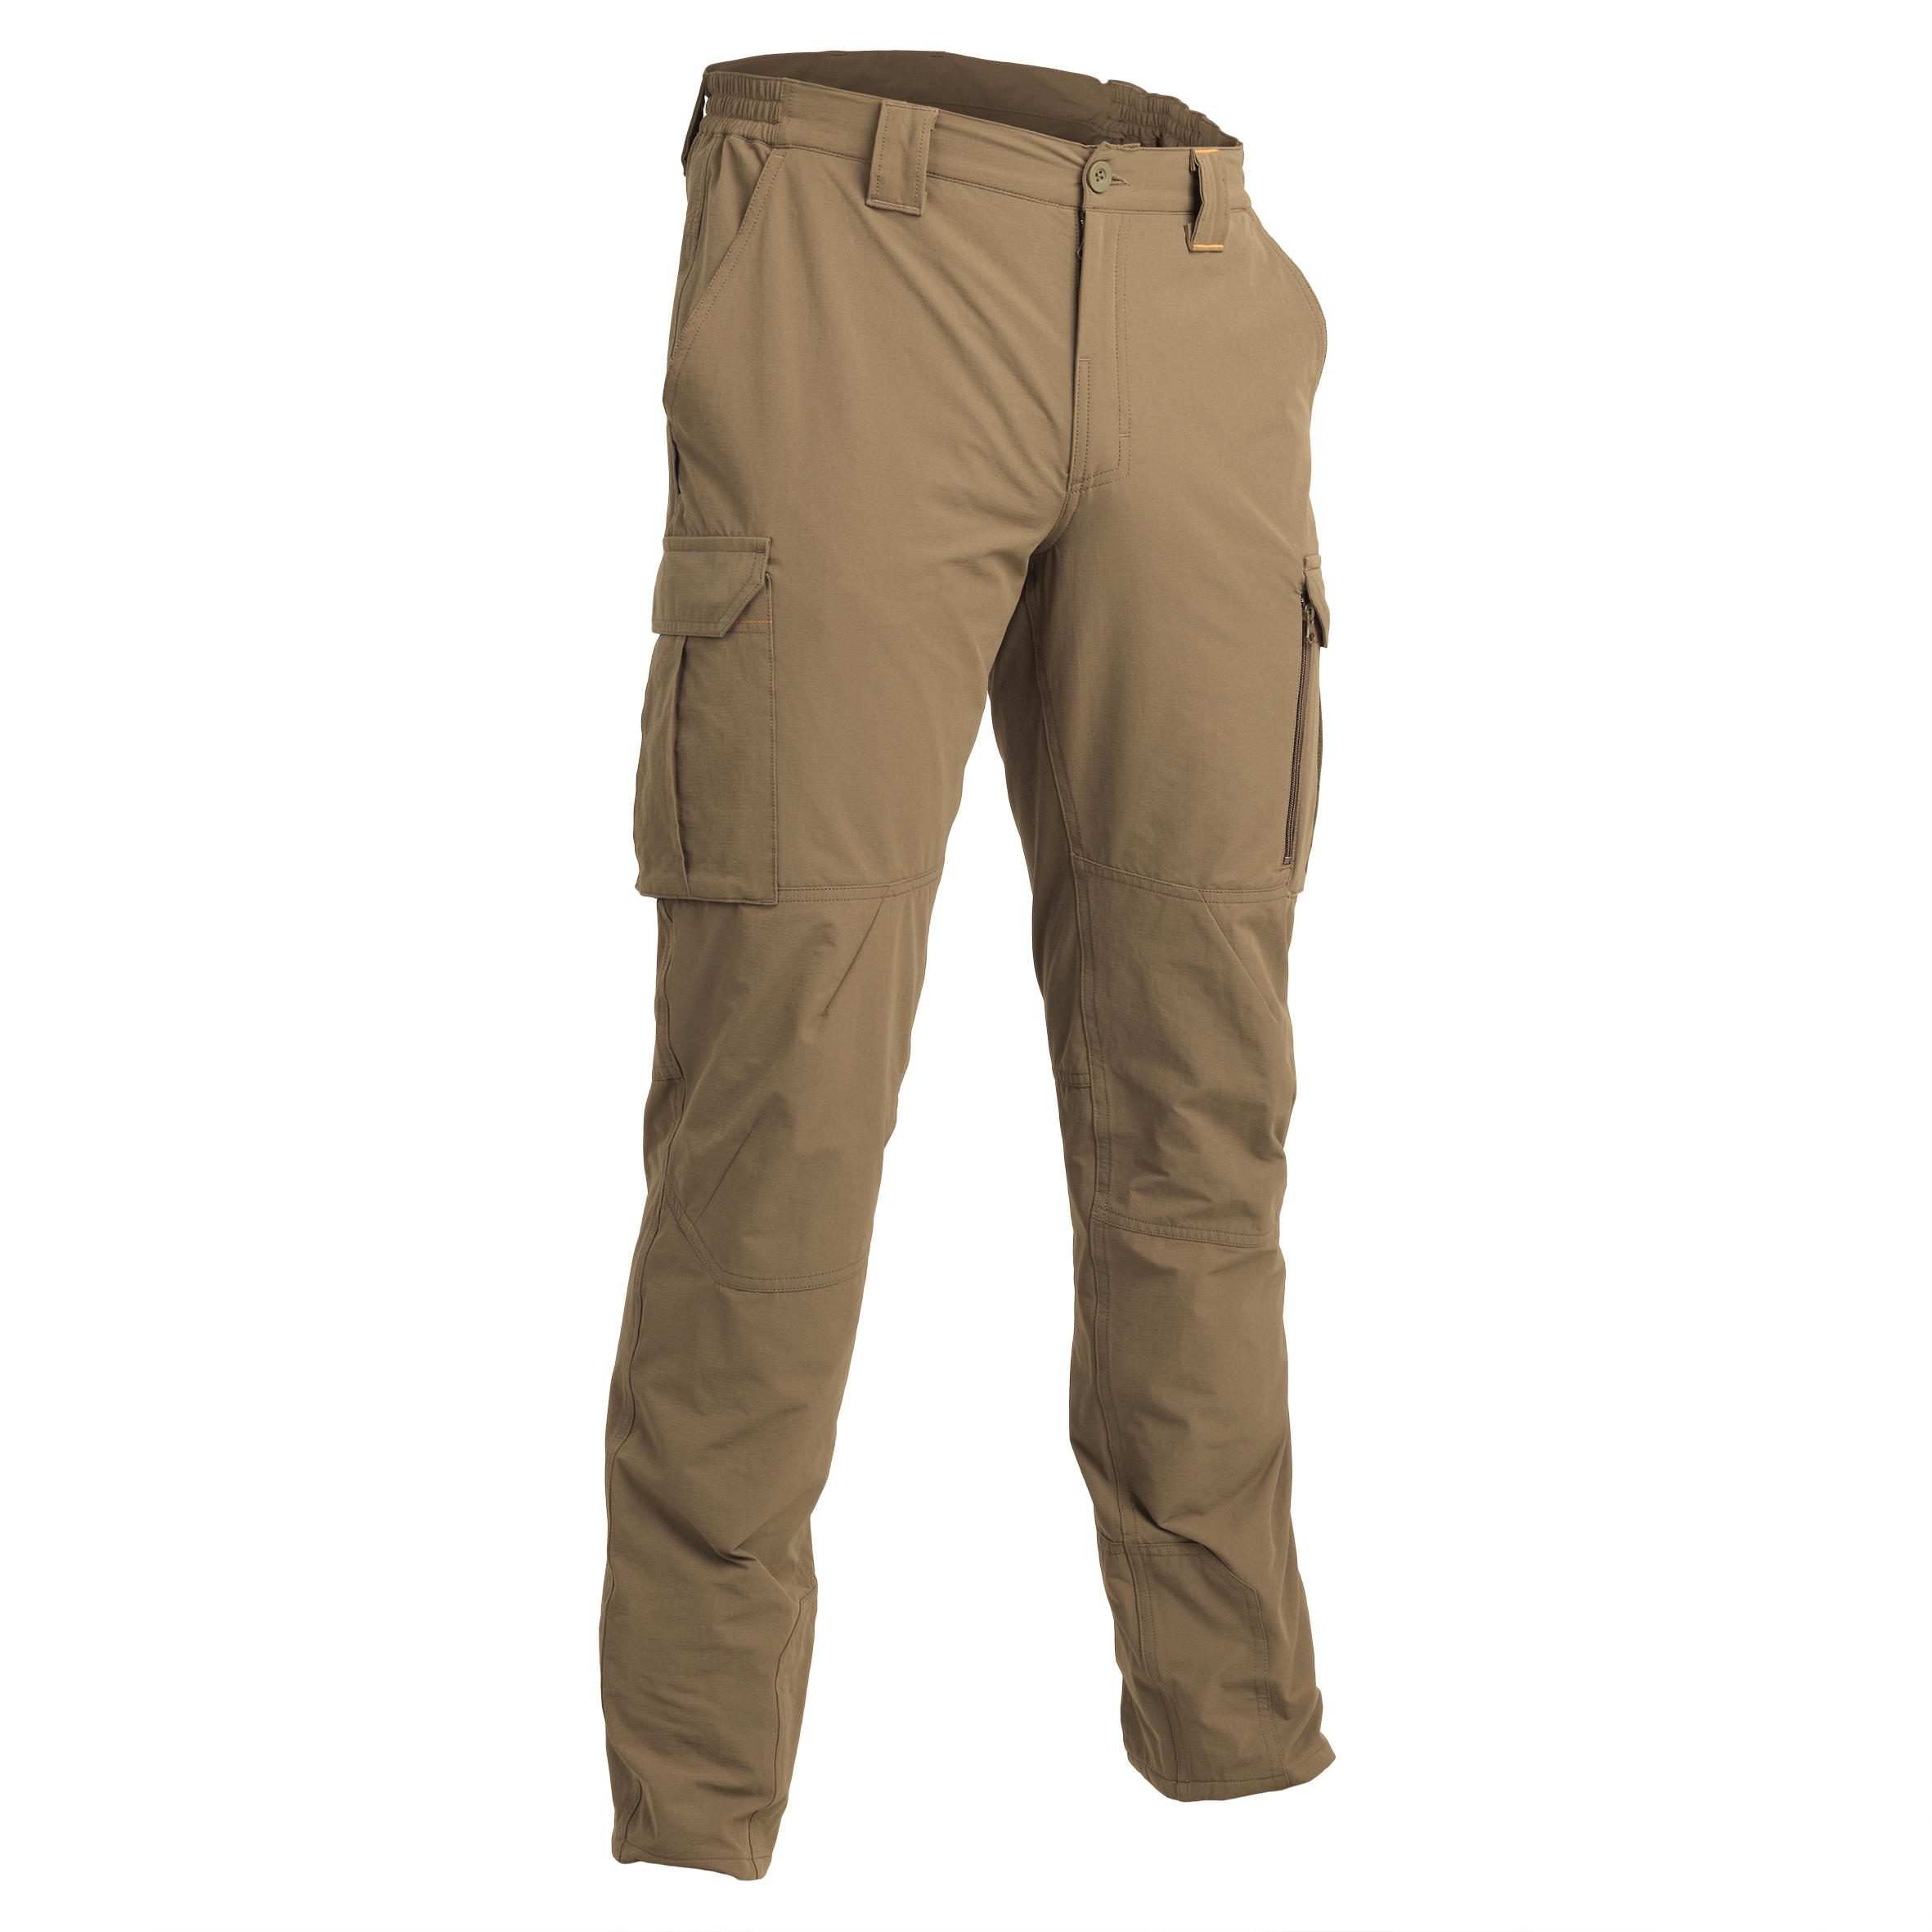 breathable pants for hot weather